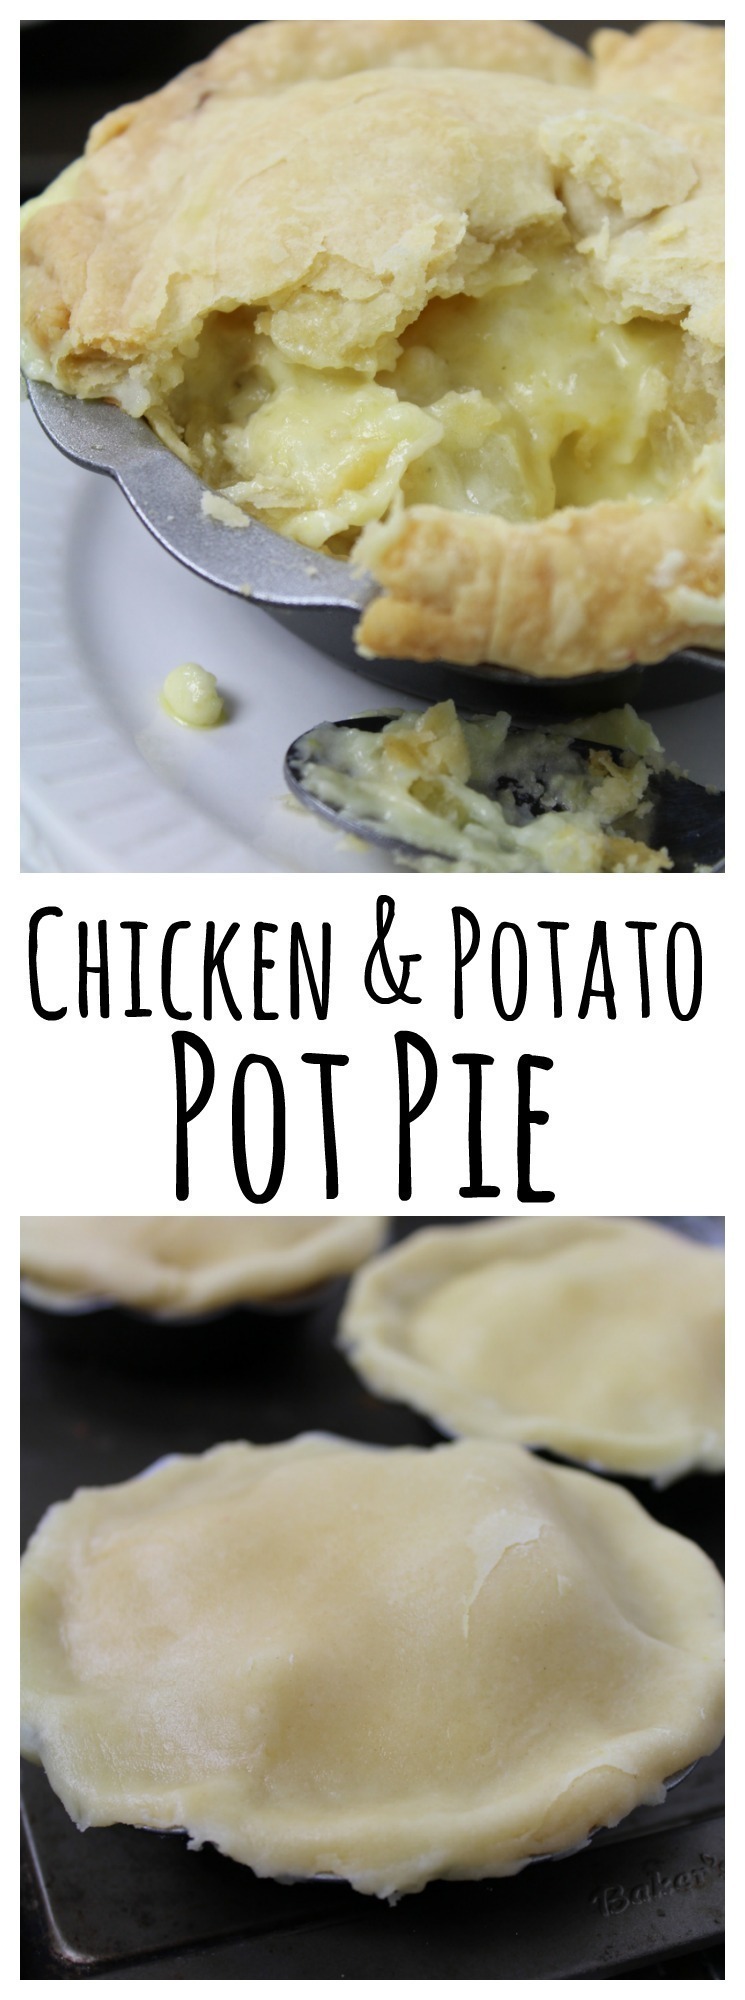 A delicious homemade chicken and potato pot pie with a homemade butter crust - comfort food at it's best!